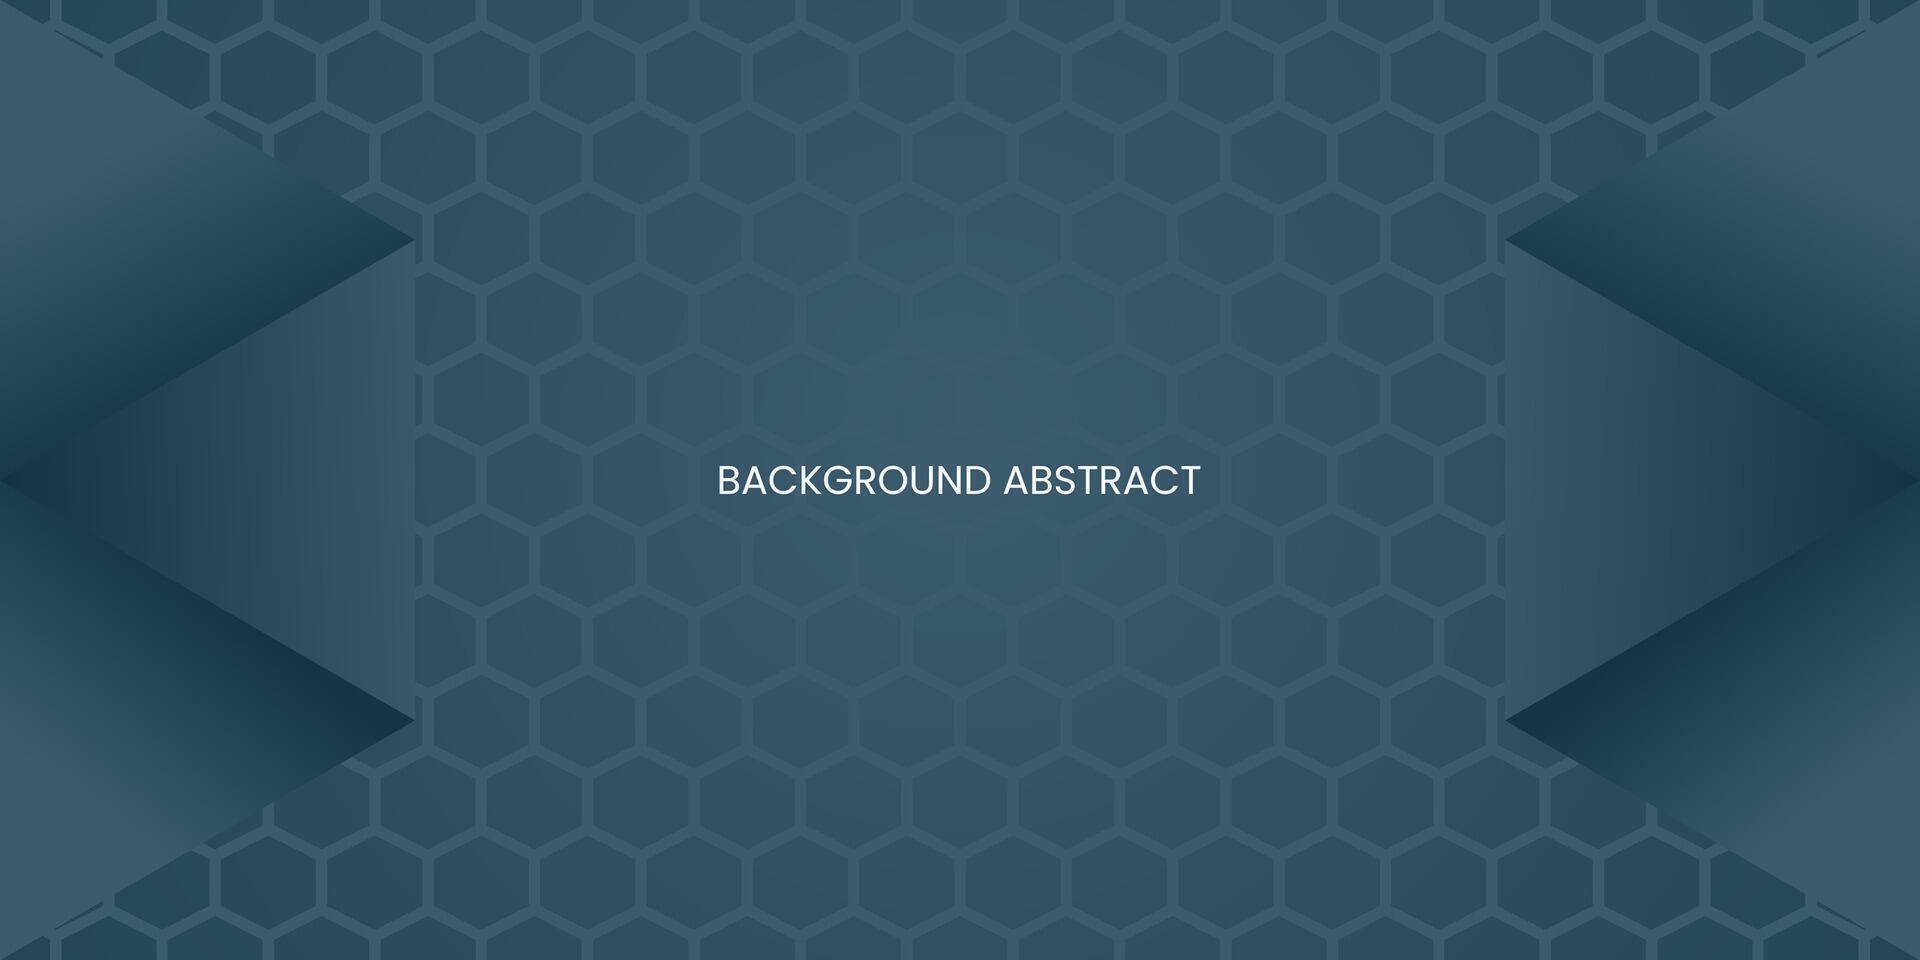 abstract background with hexagonal shapes vector